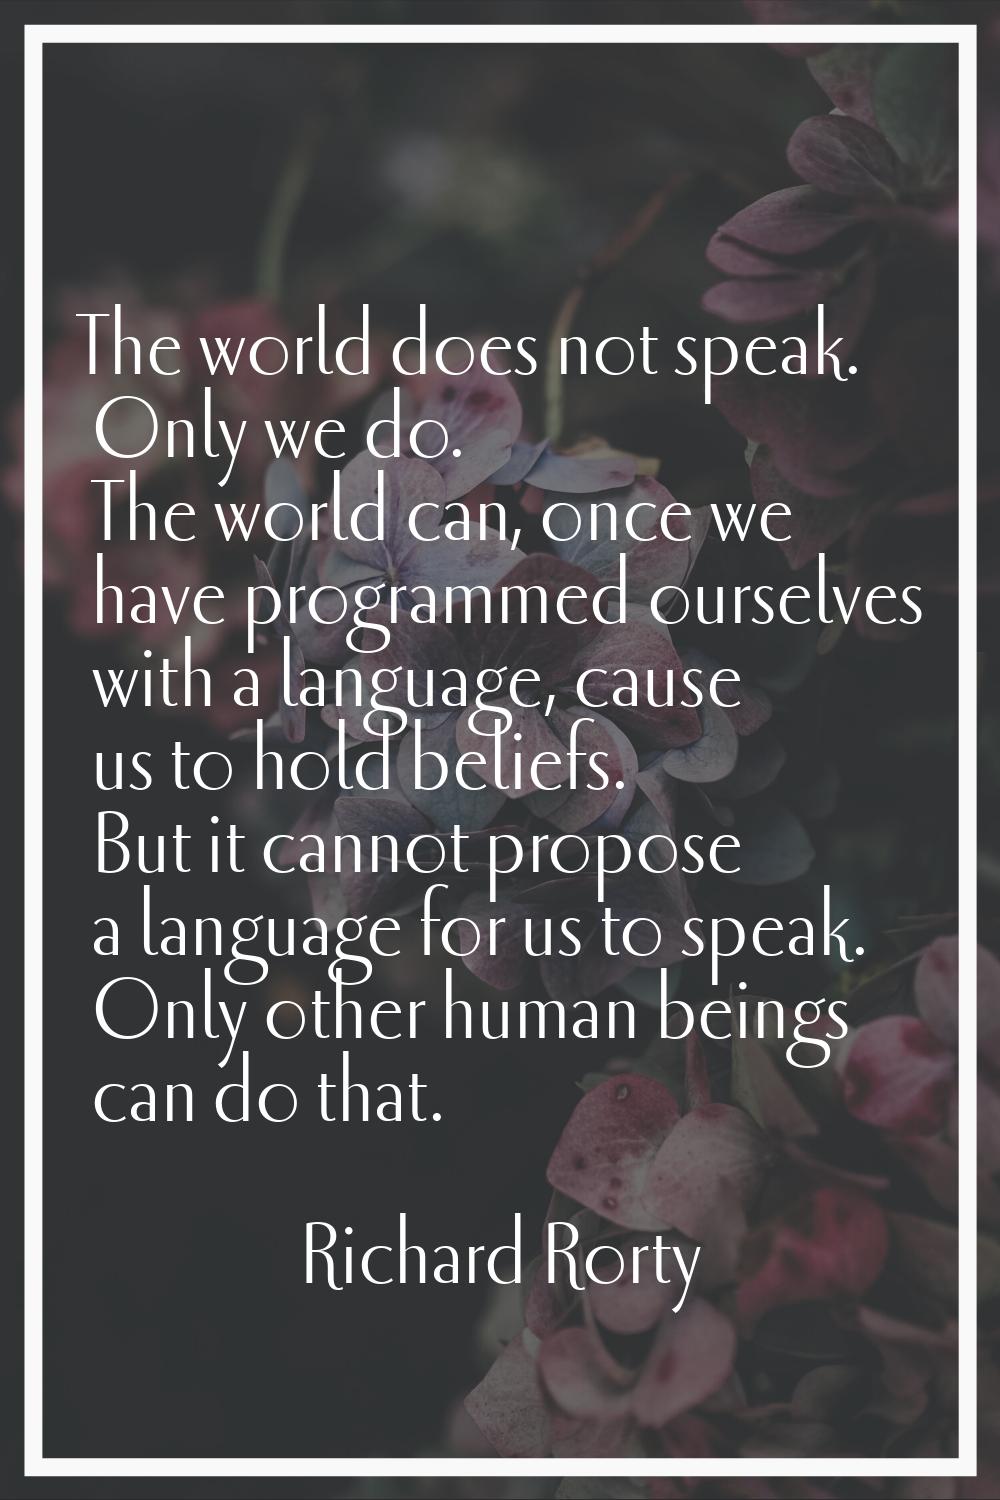 The world does not speak. Only we do. The world can, once we have programmed ourselves with a langu